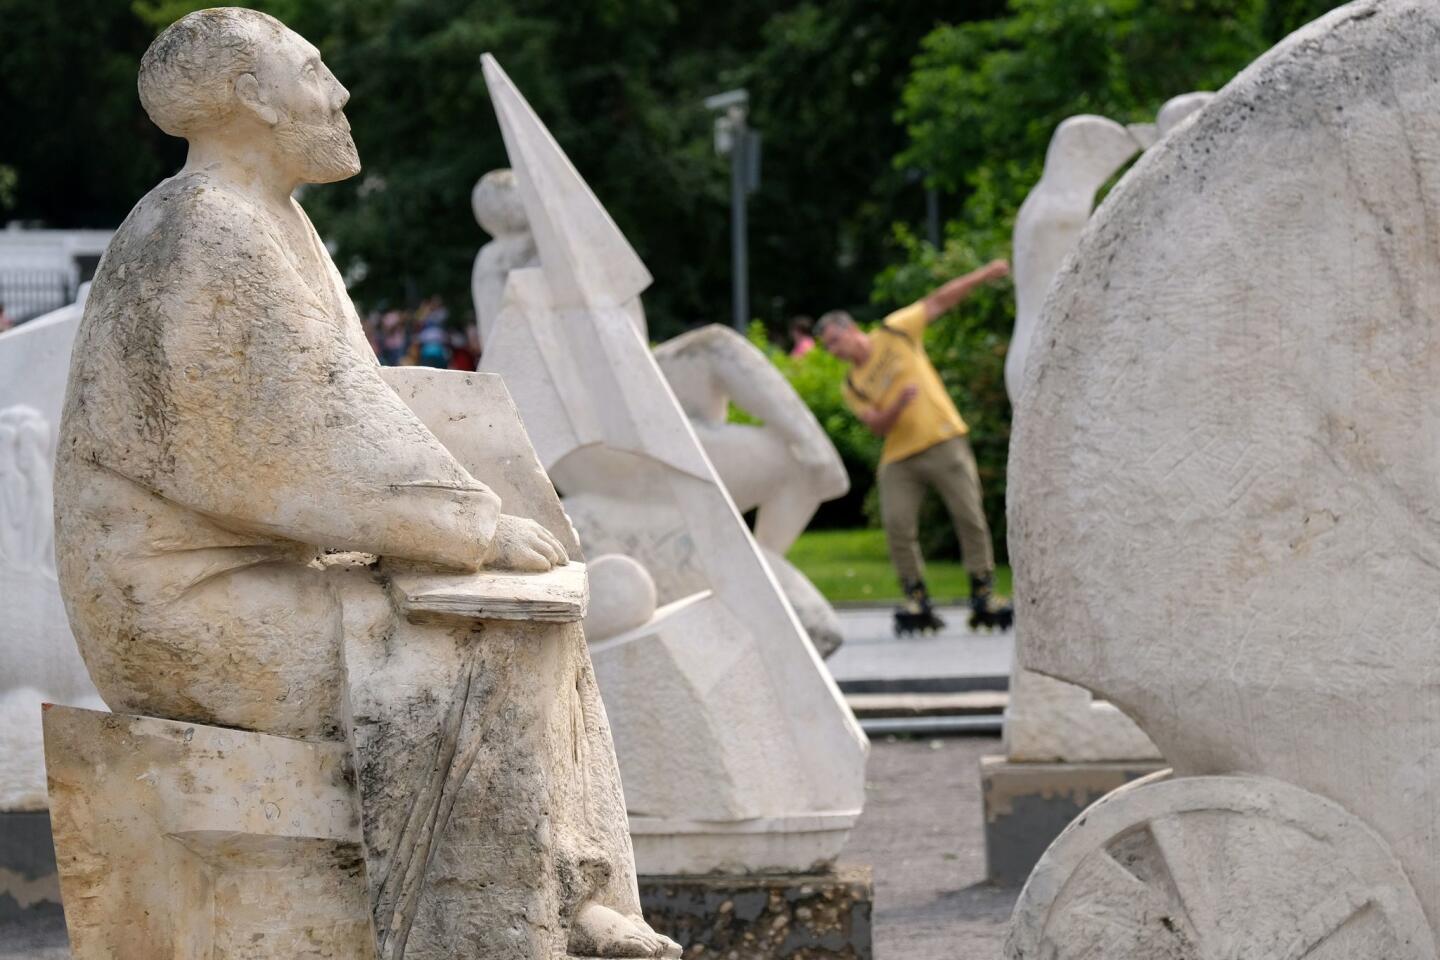 Muzeon Sculpture Park in Moscow